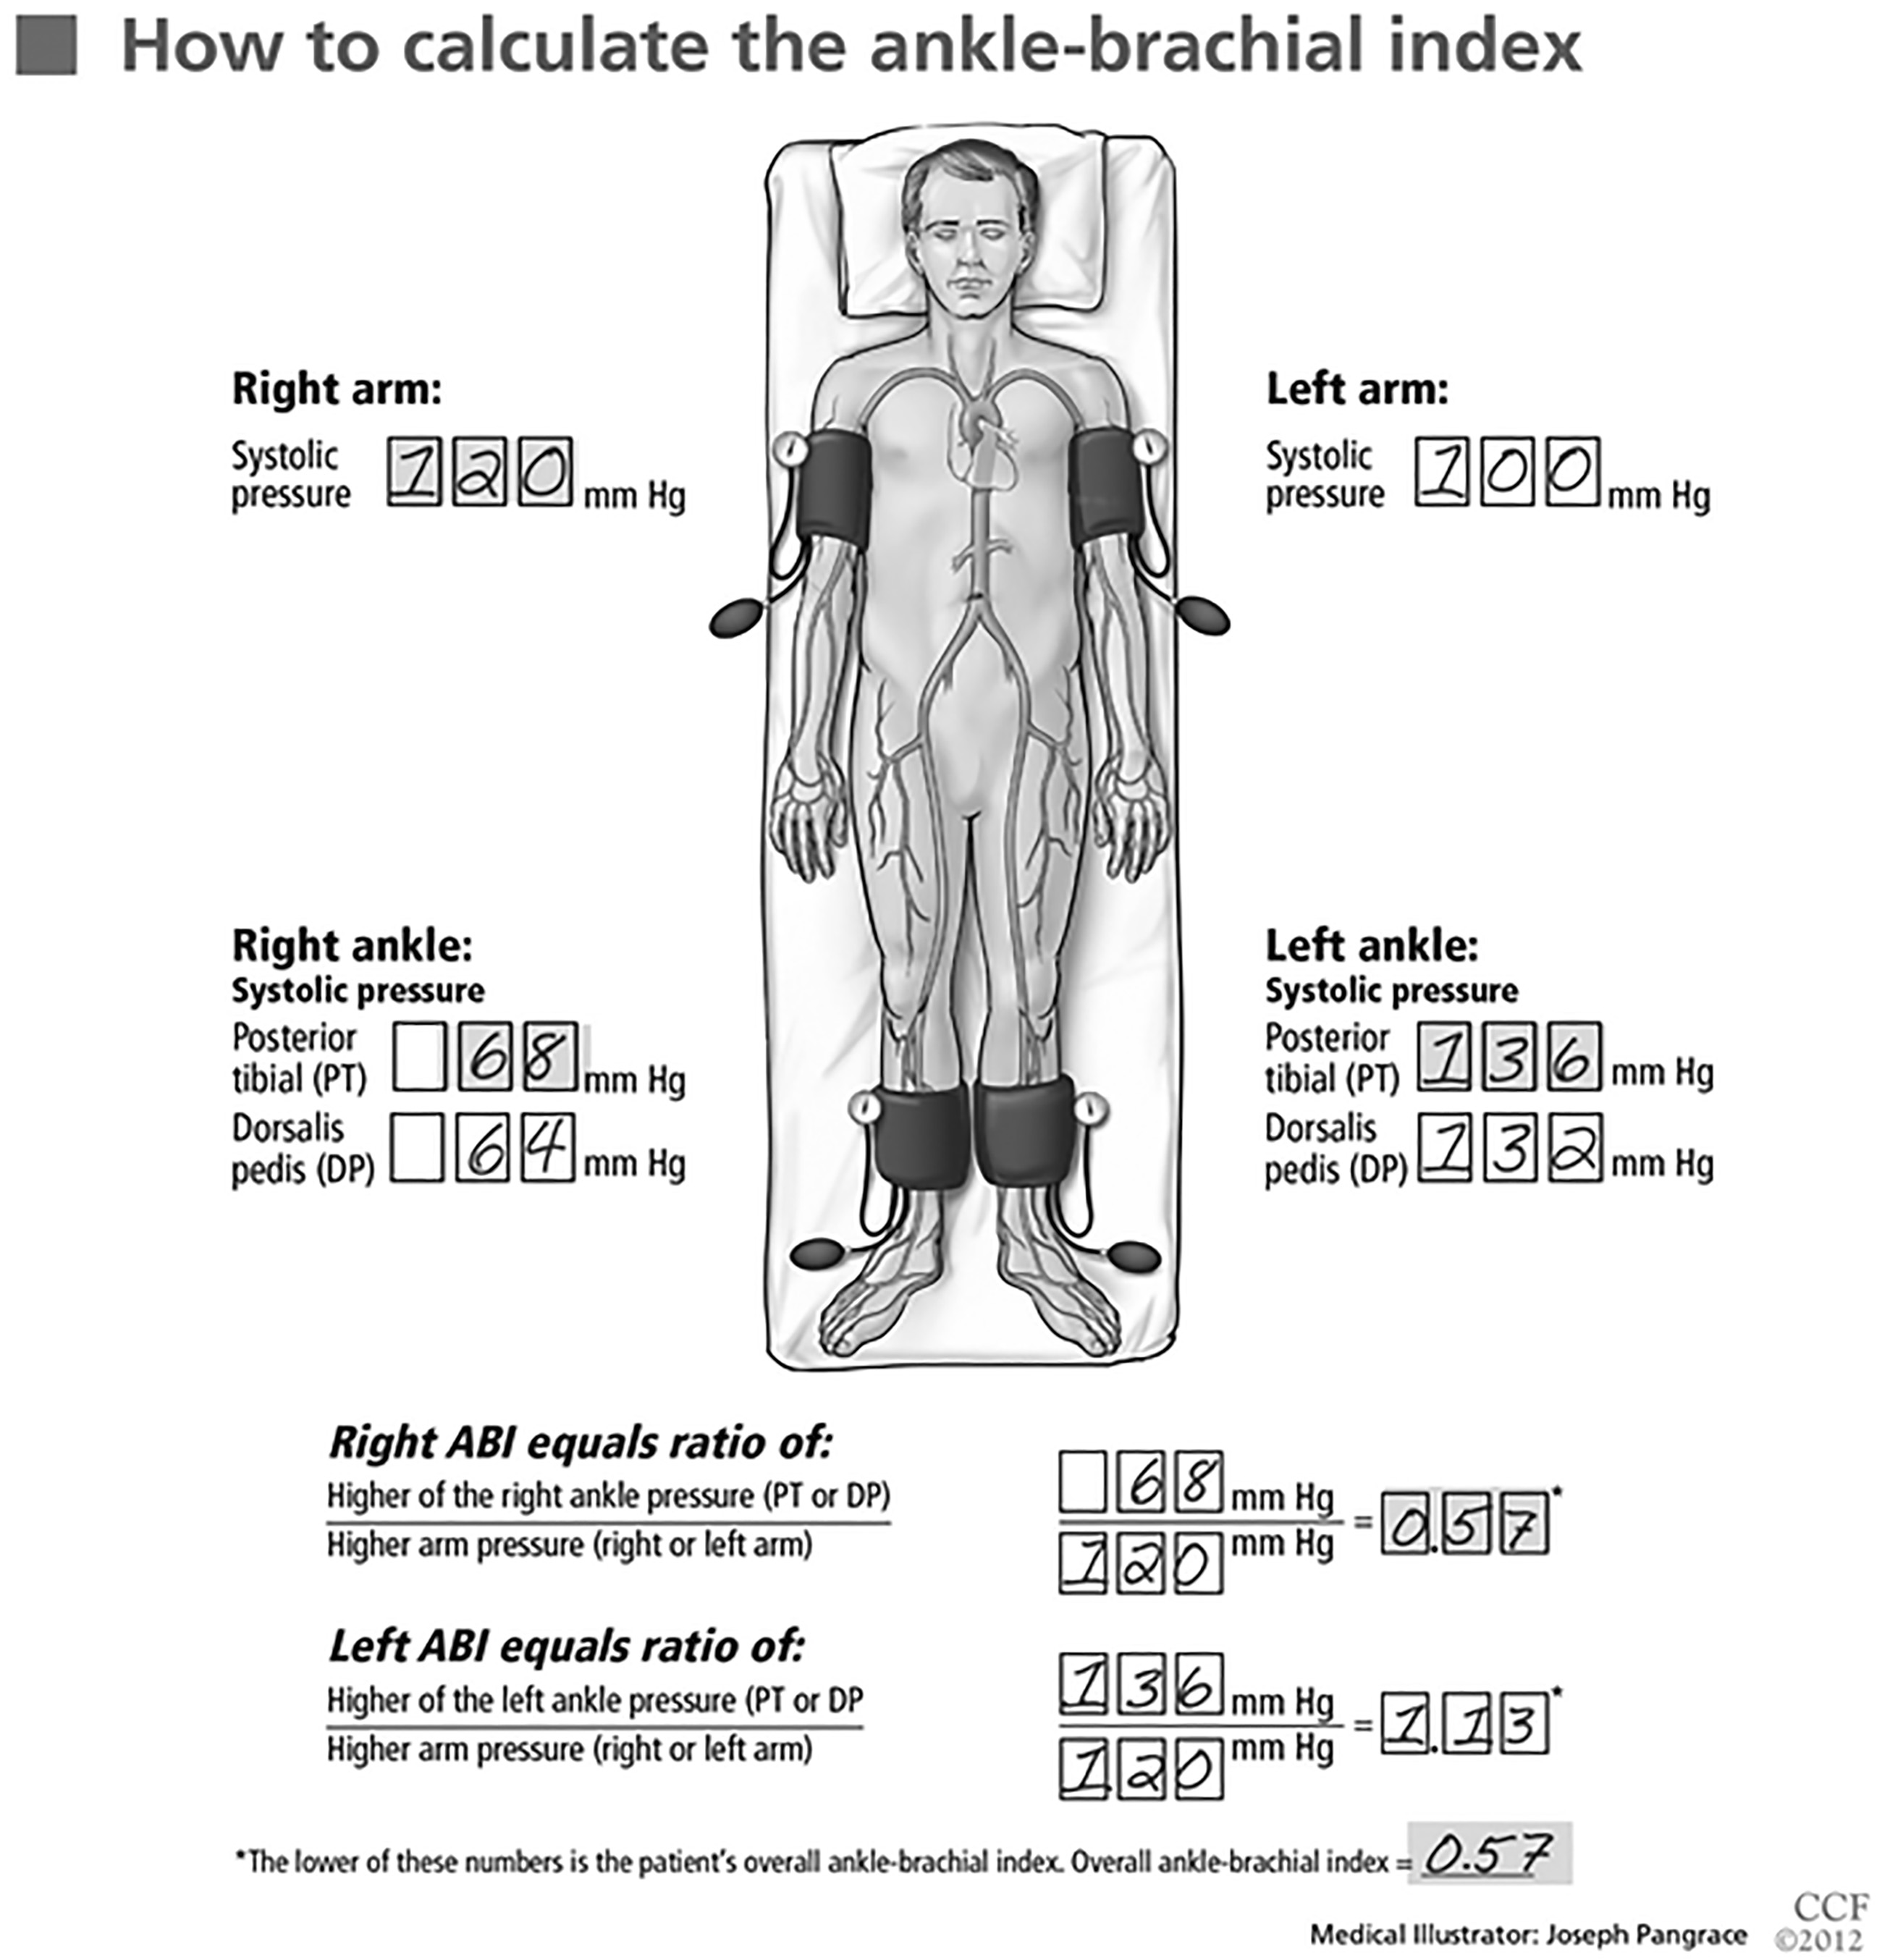 Calculation of ankle-brachial index